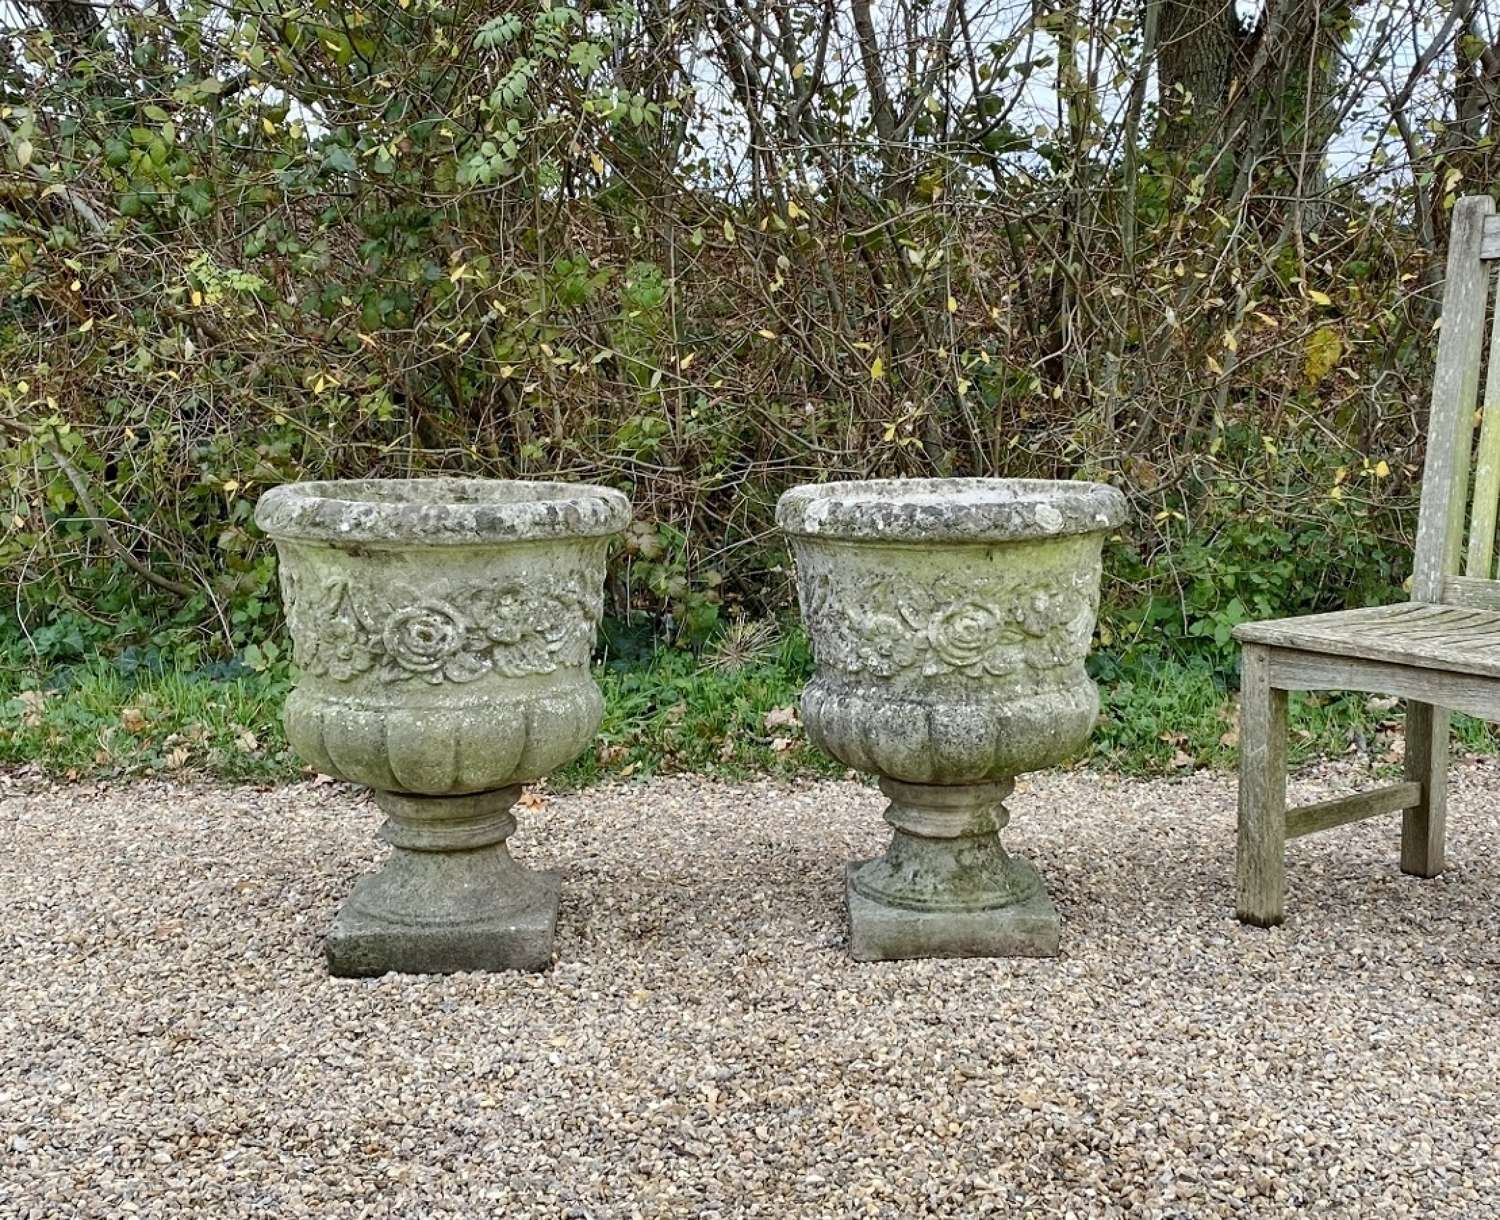 Pair of Patinated Flower Urns